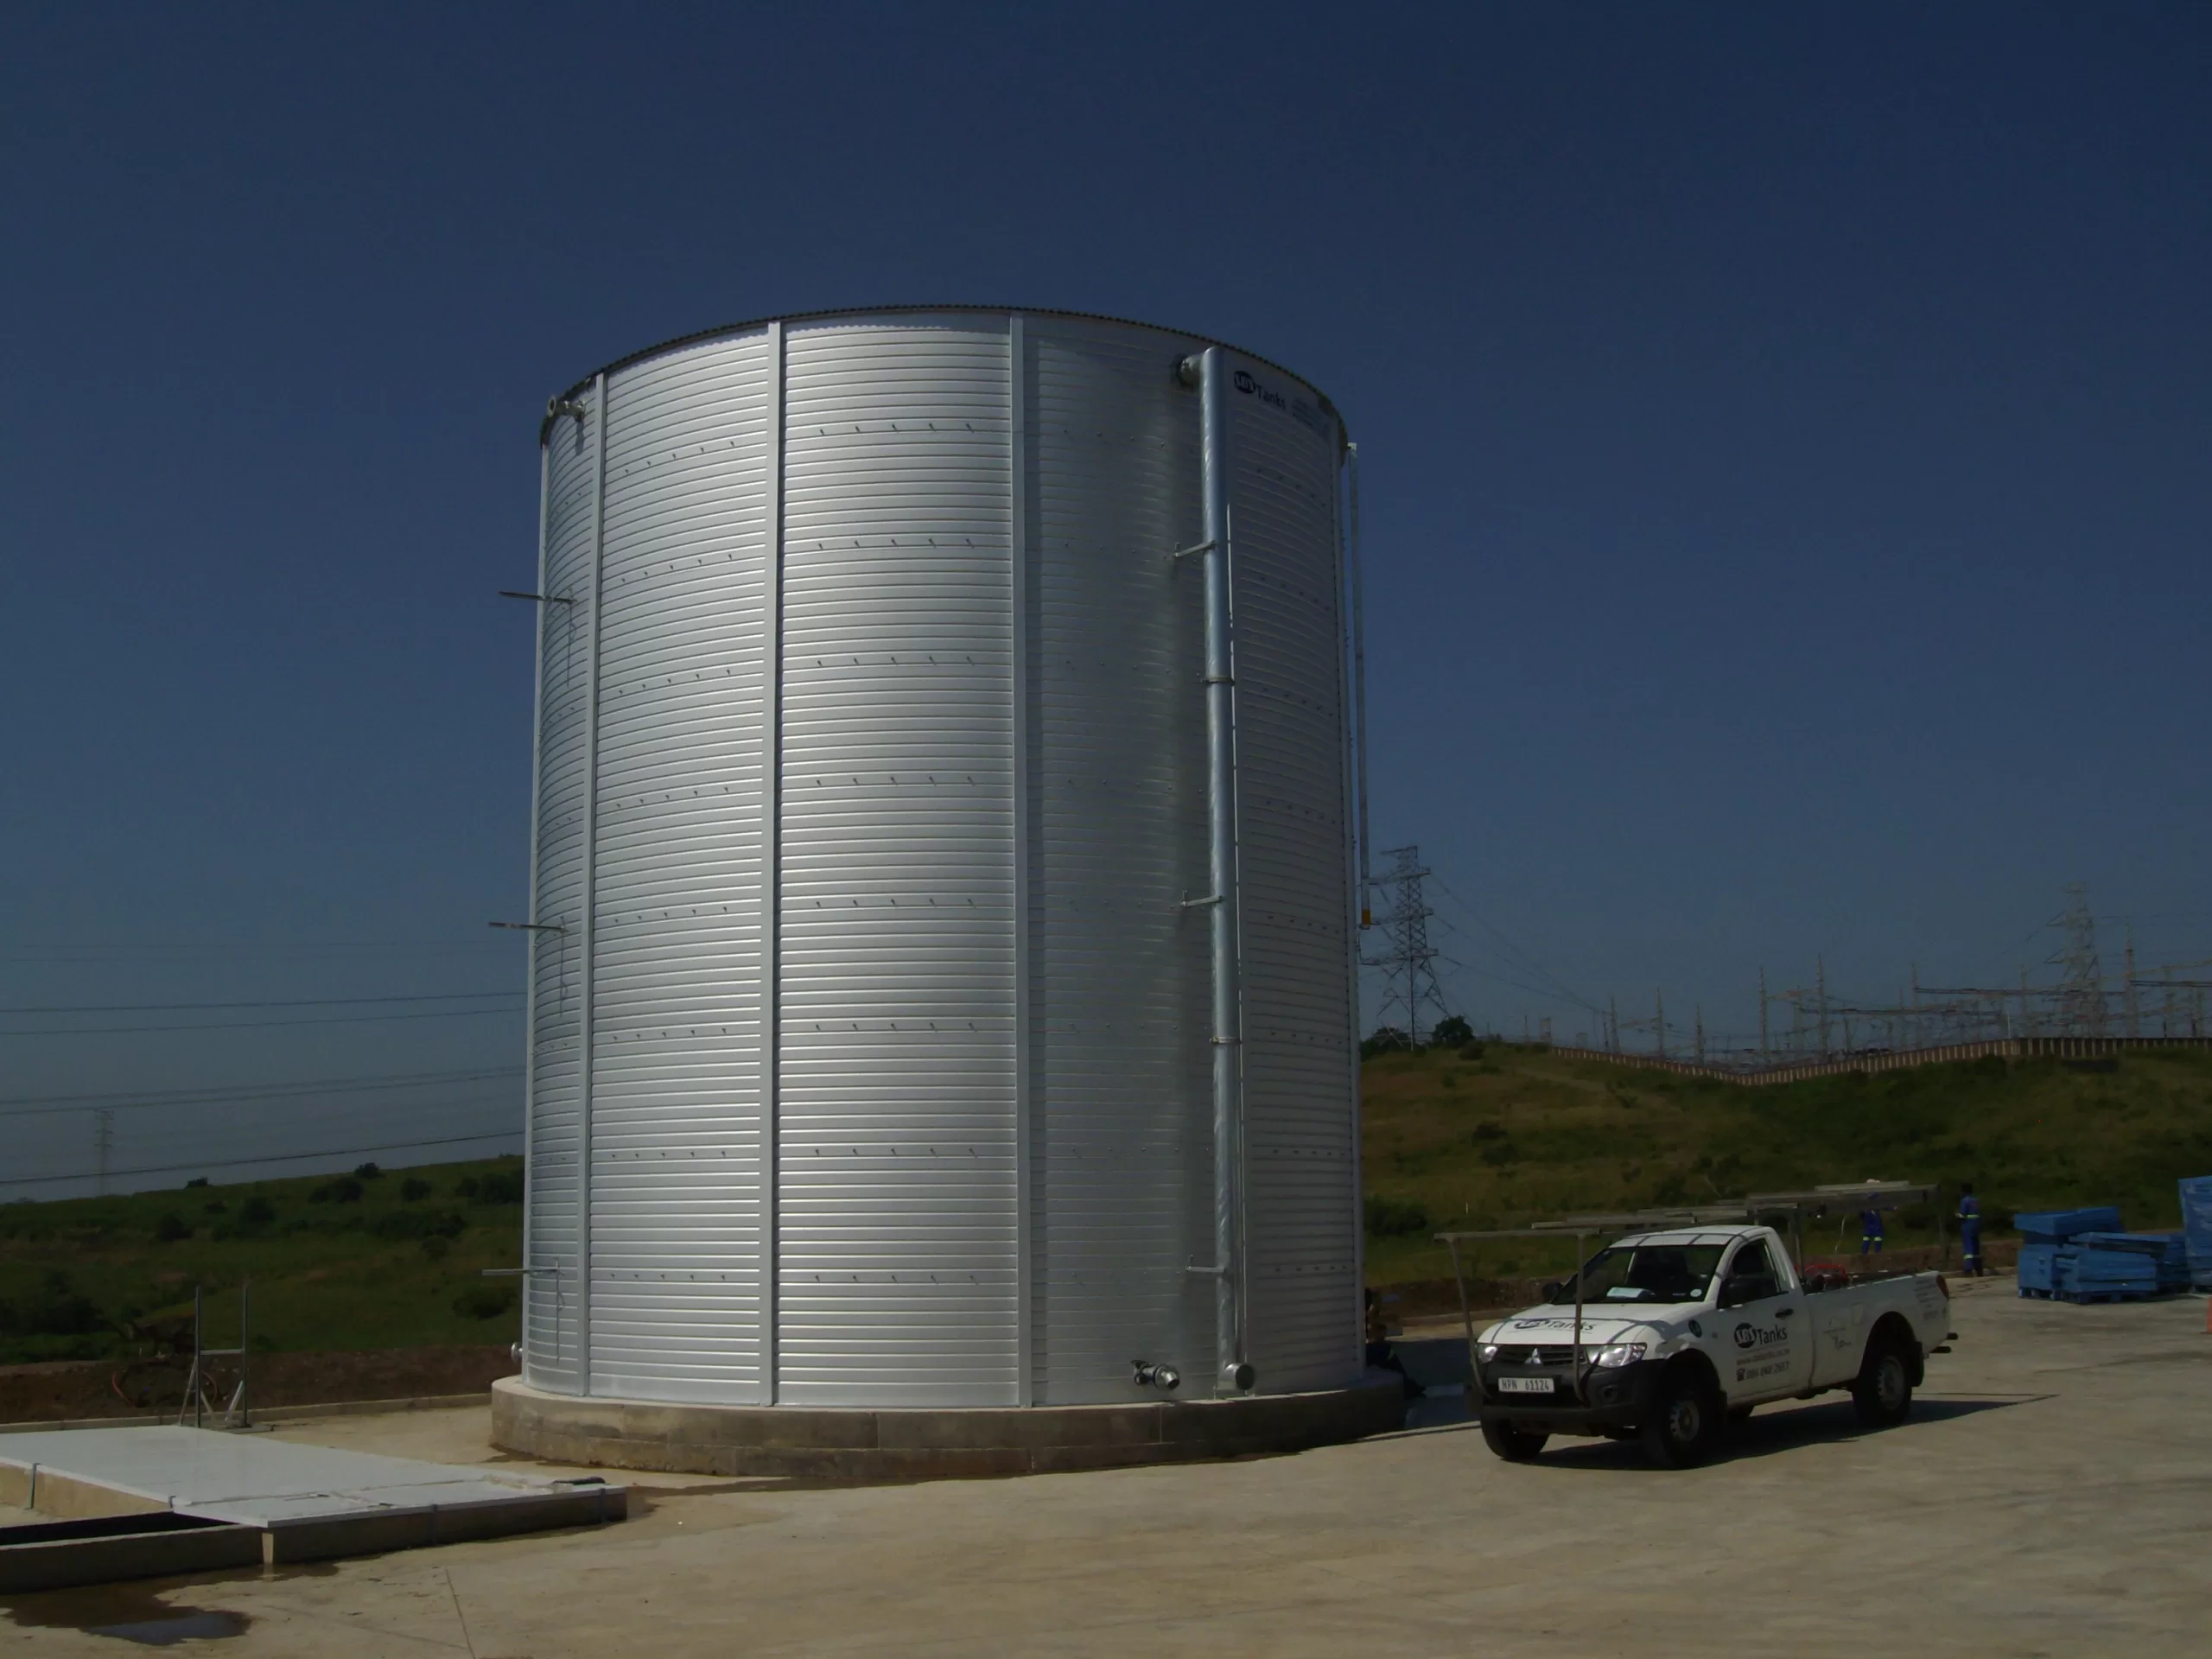 Standing Tall - SBS Tanks installed a 500 kilolitre water storage tank for CHEP to ensure the company could continue to operate during municipal water outages